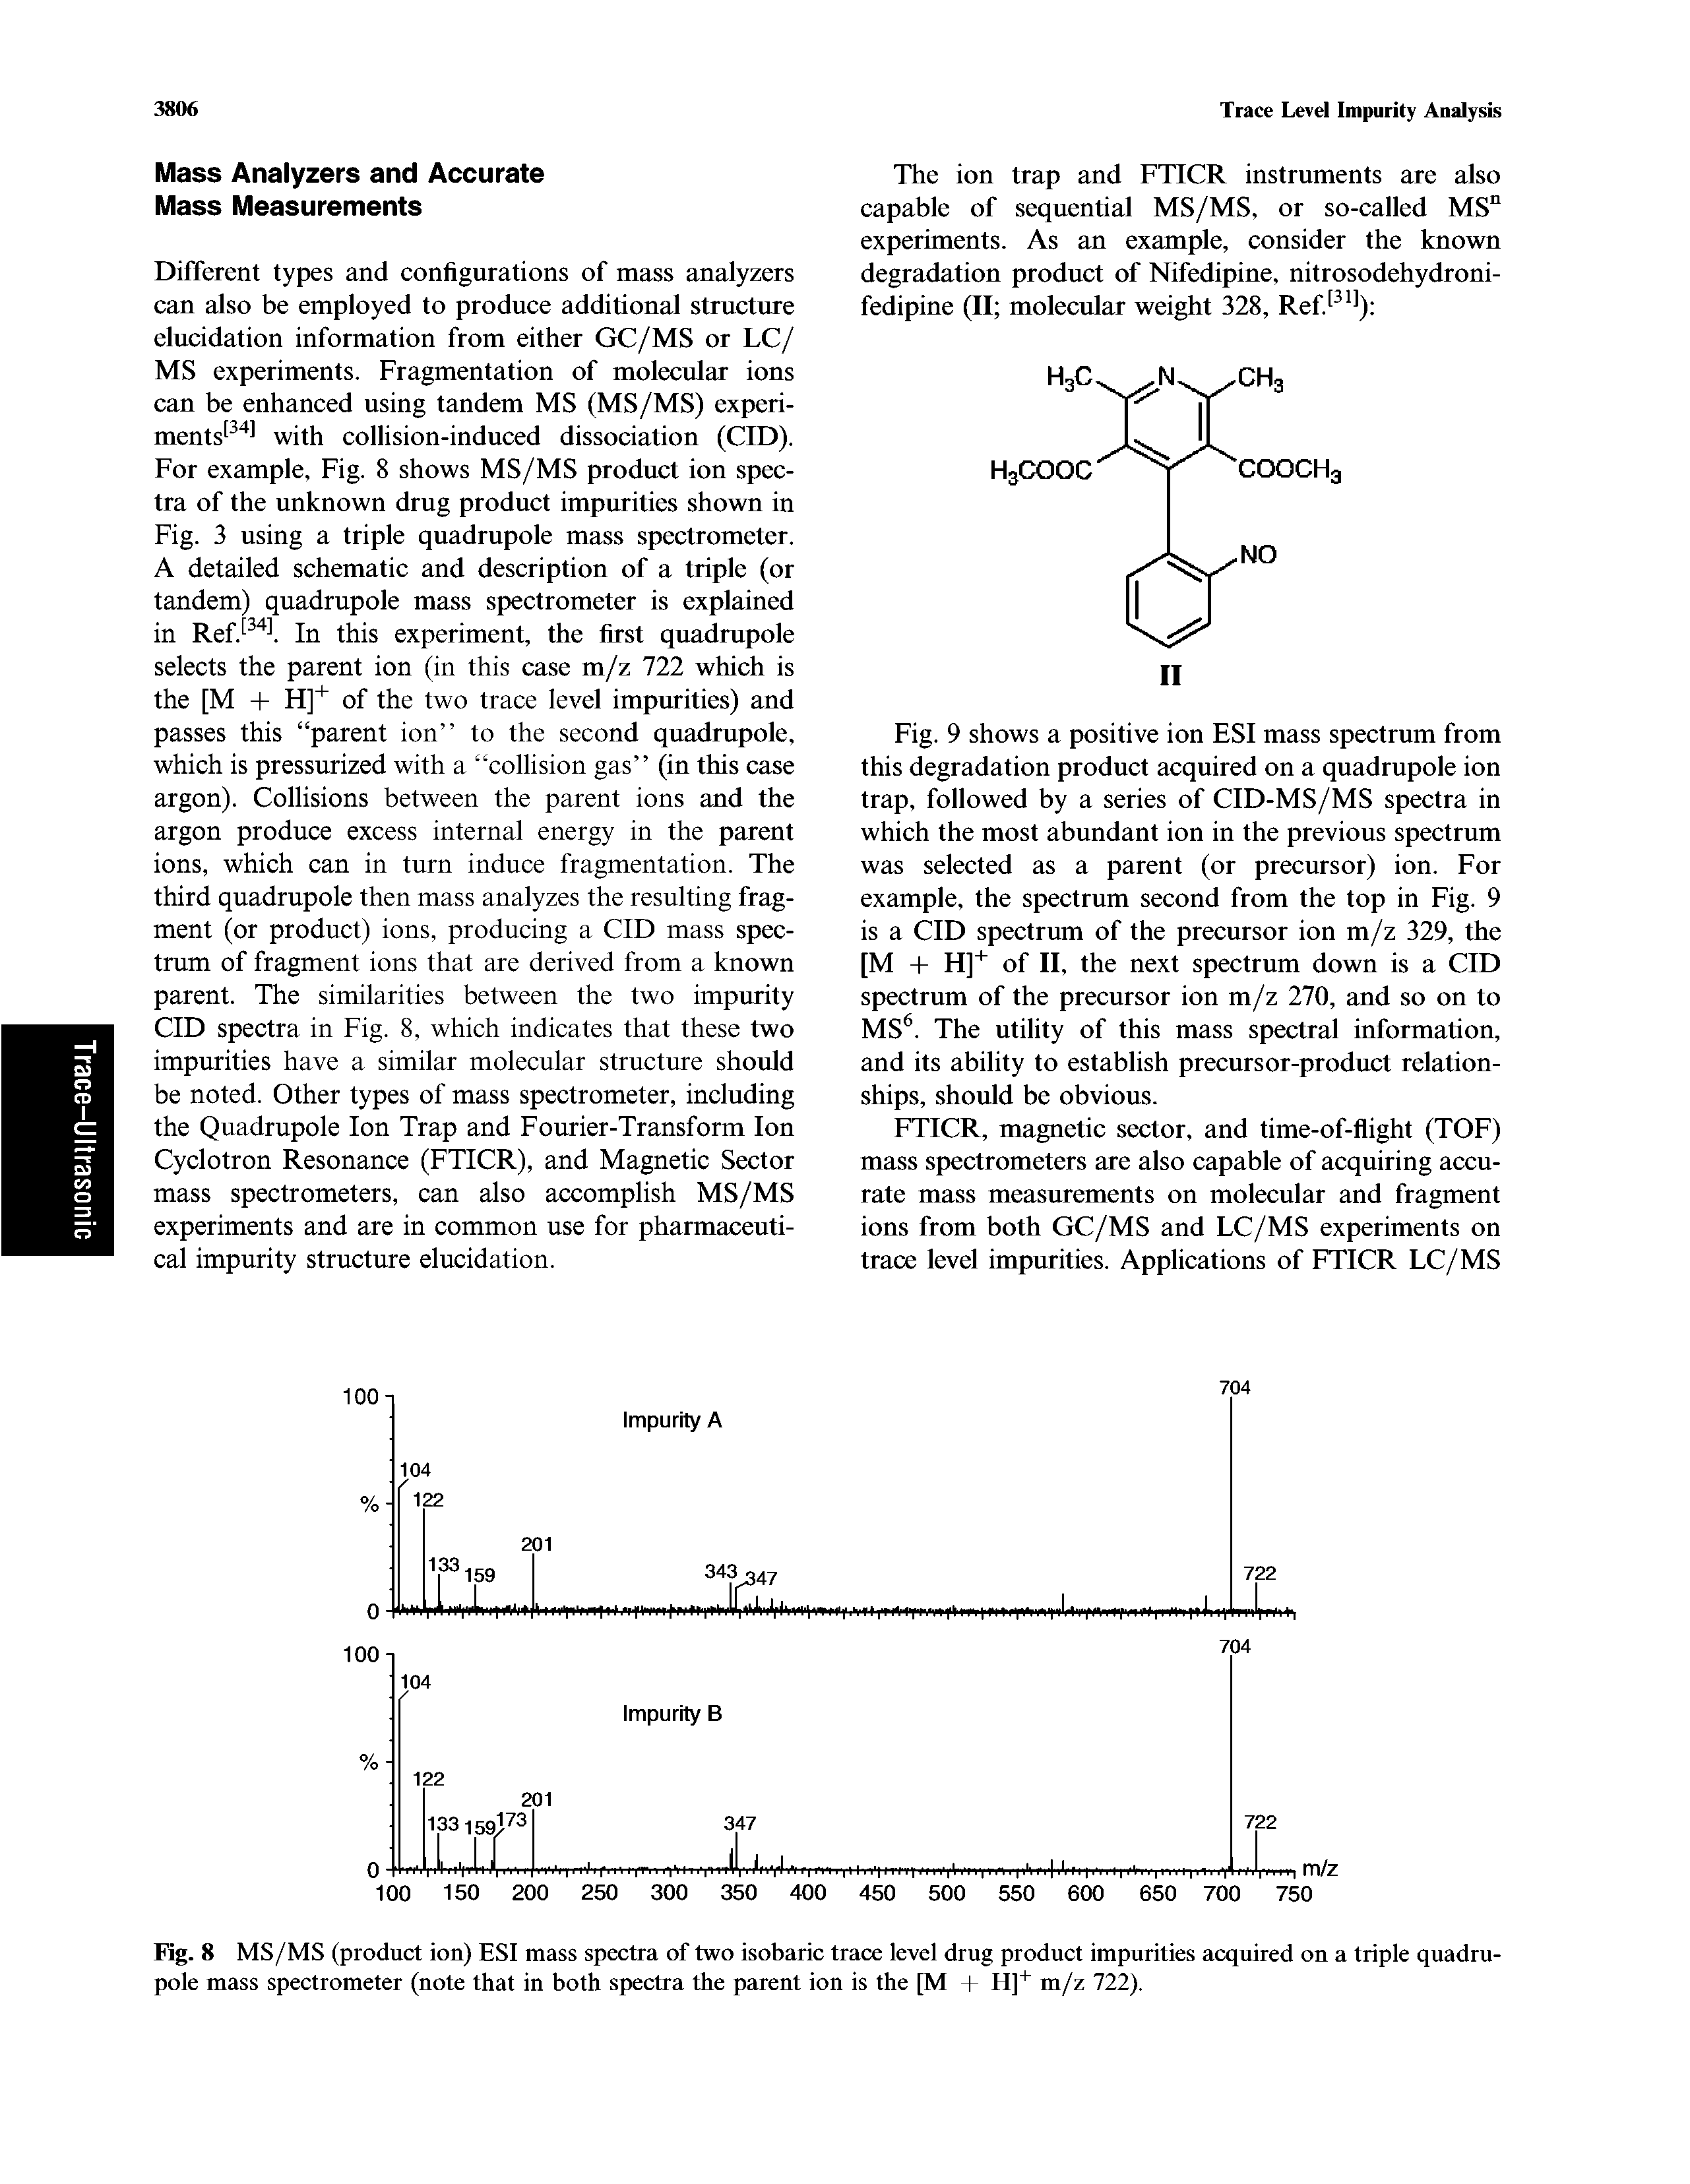 Fig. 8 MS/MS (product ion) ESI mass spectra of two isobaric trace level drug product impurities acquired on a triple quadrupole mass spectrometer (note that in both spectra the parent ion is the [M + H] m/z 722).